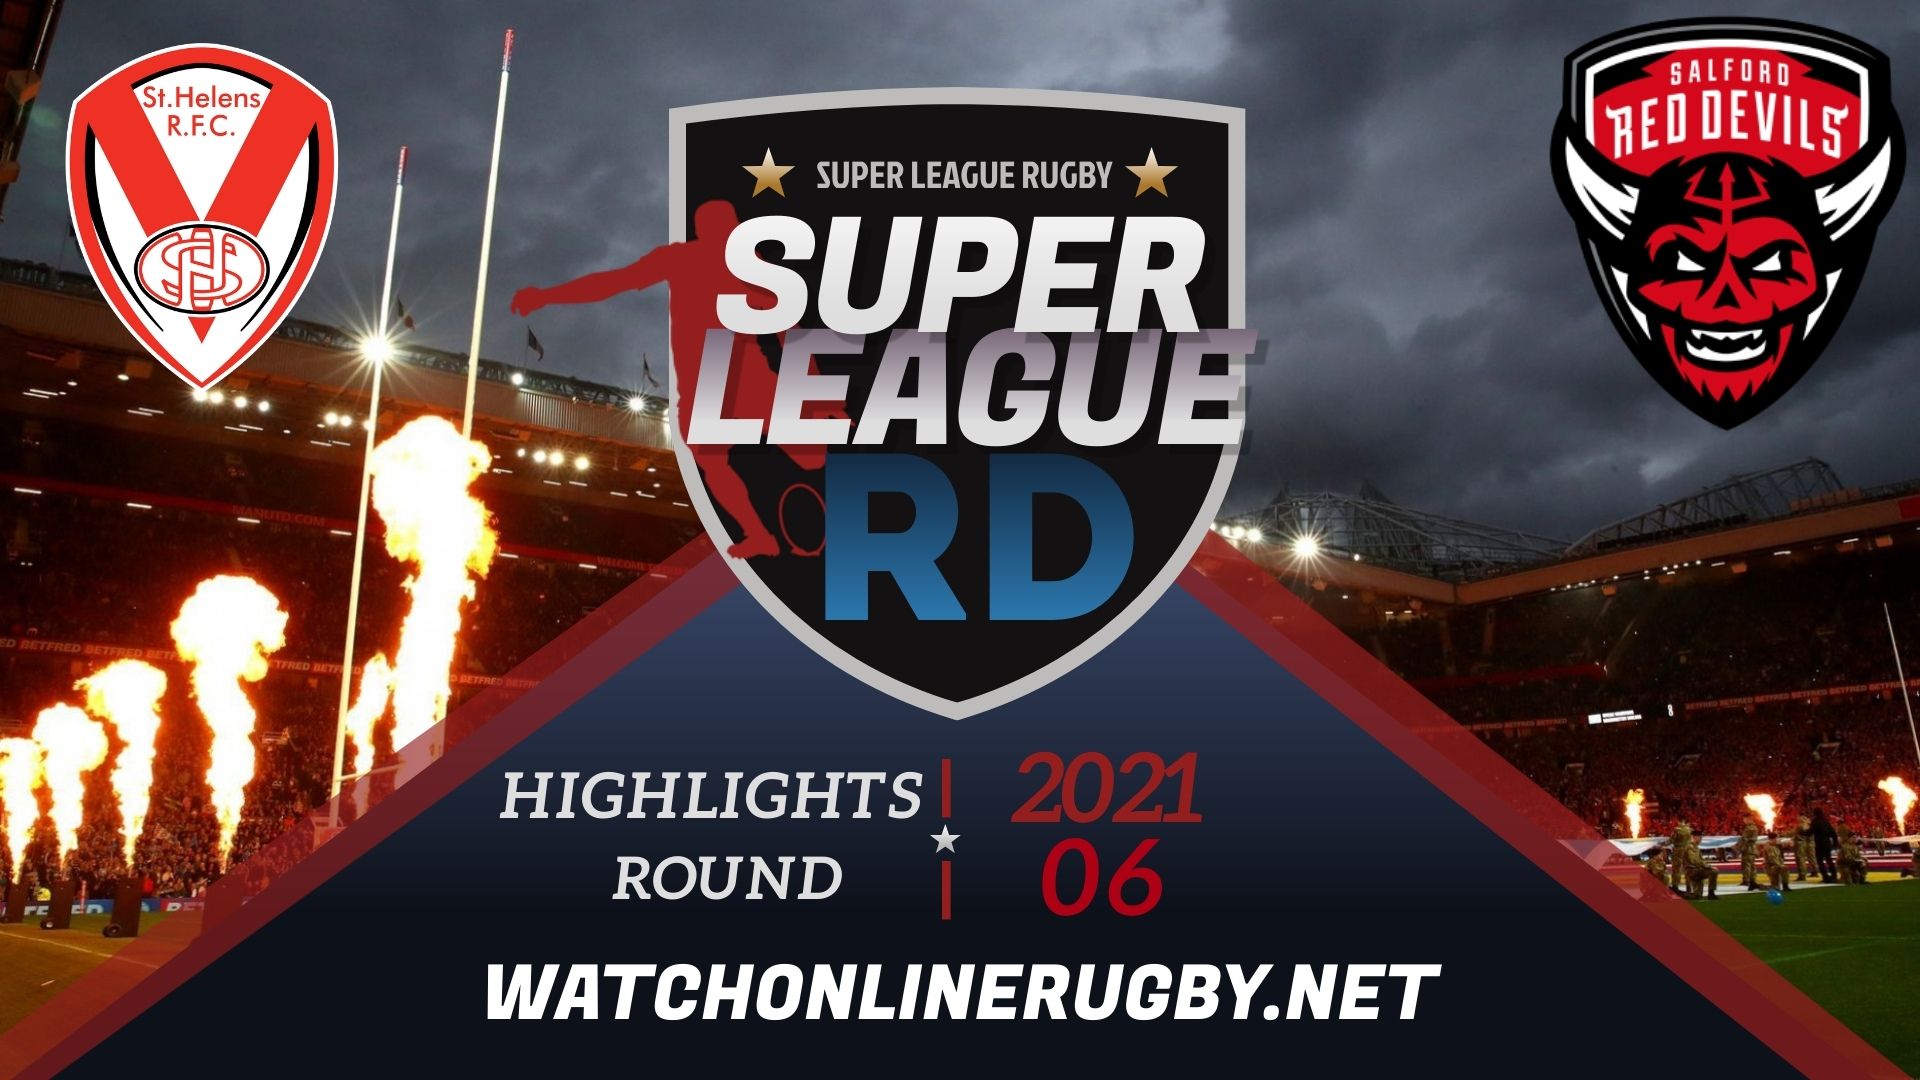 St Helens Vs Salford Red Devils Super League Rugby 2021 RD 6